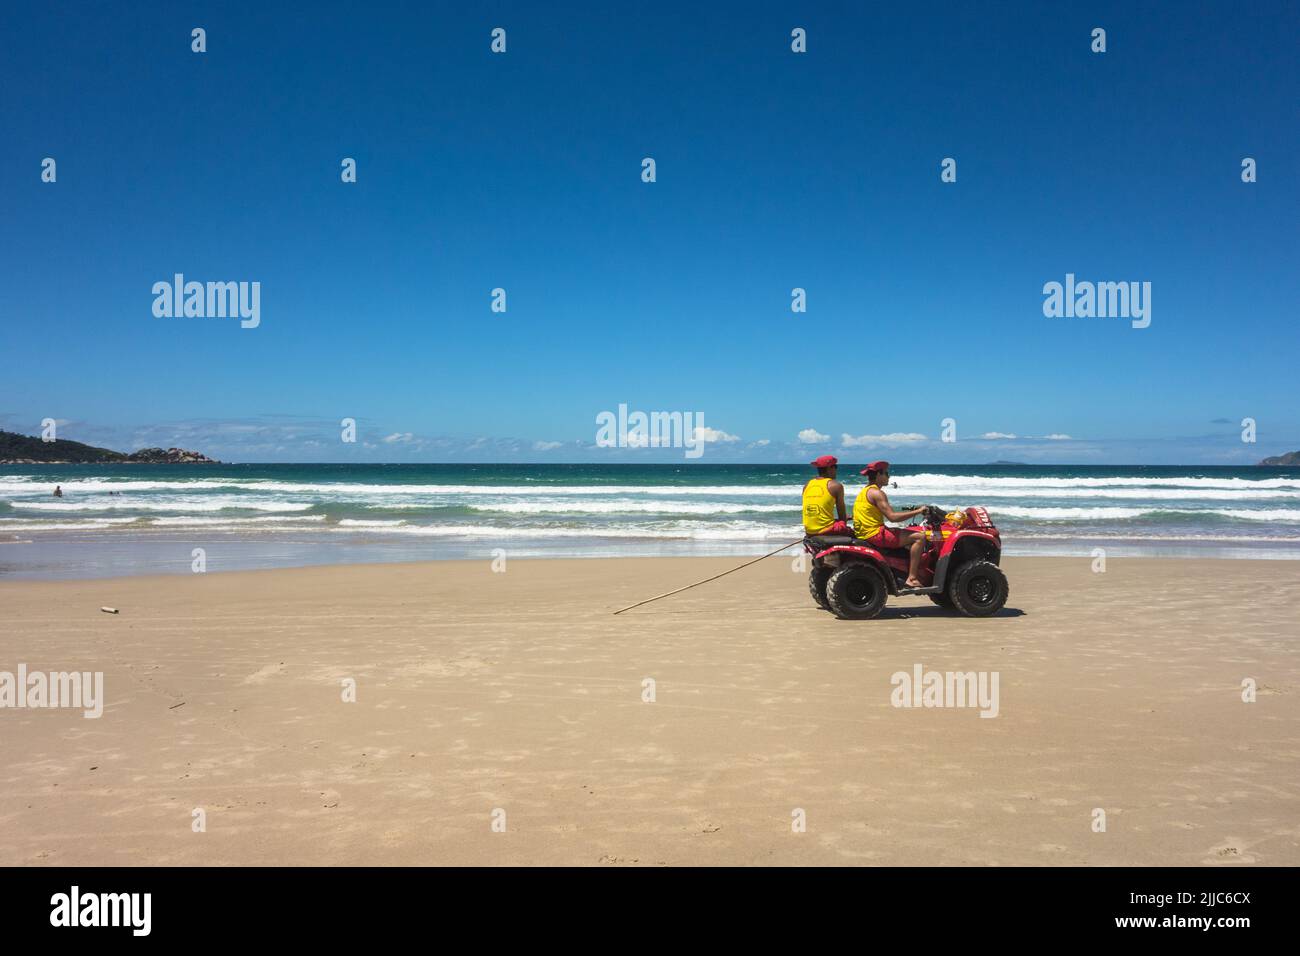 Red Quadricycle with two males lifeguards wearing a yellow t-shirt and  red hut driving on the beach with blue sky and calm sea Stock Photo